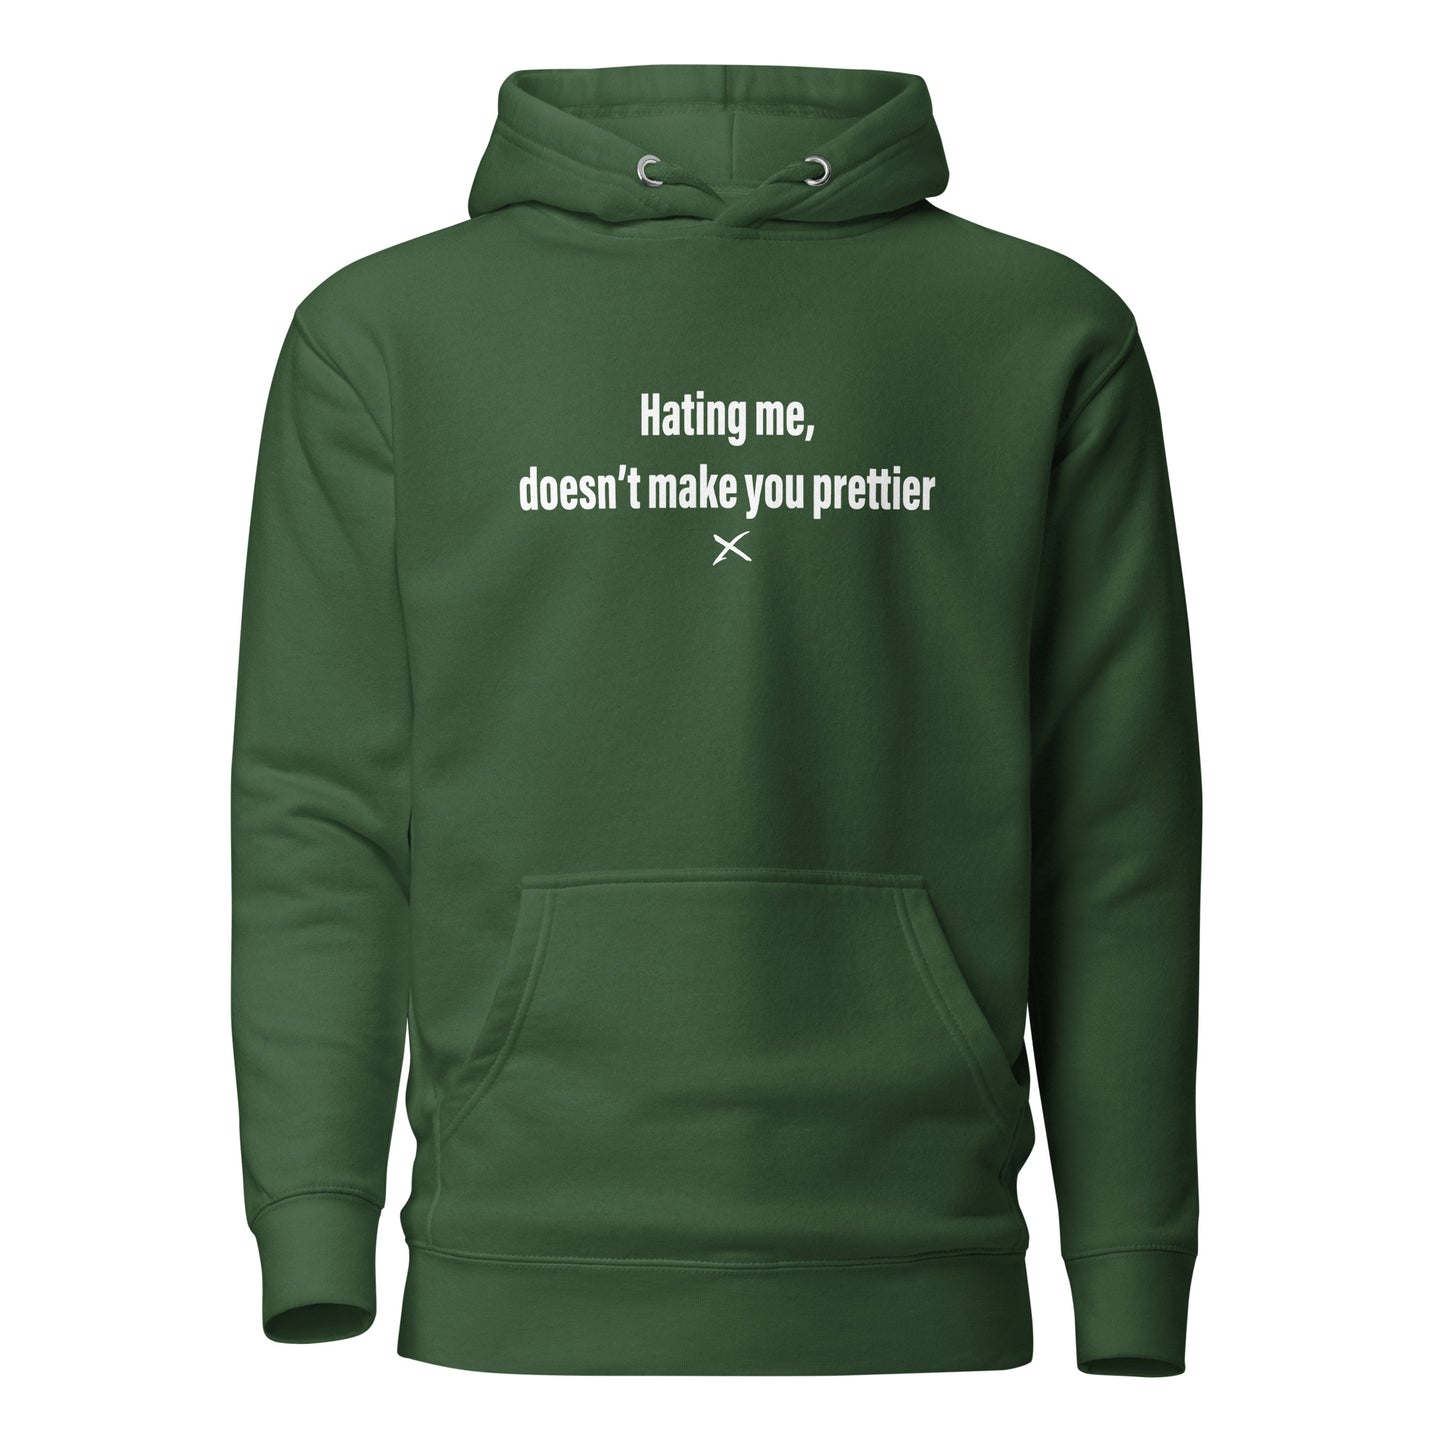 Hating me, doesn't make you prettier - Hoodie